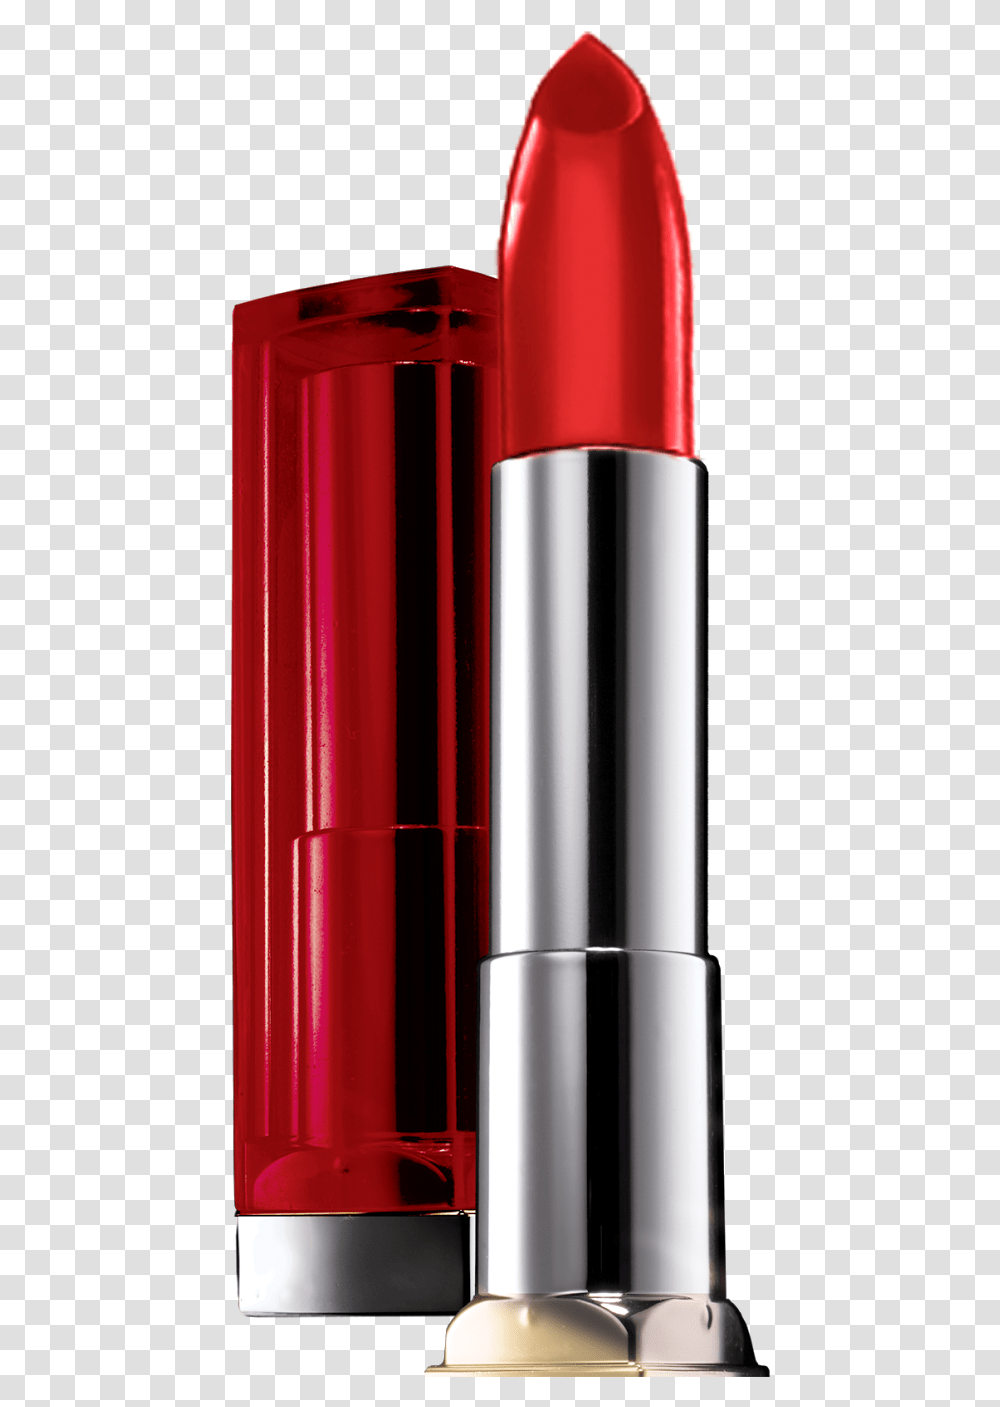 Now You Can Download Lipstick File Red Lipstick, Cosmetics, Cylinder, Alcohol, Beverage Transparent Png